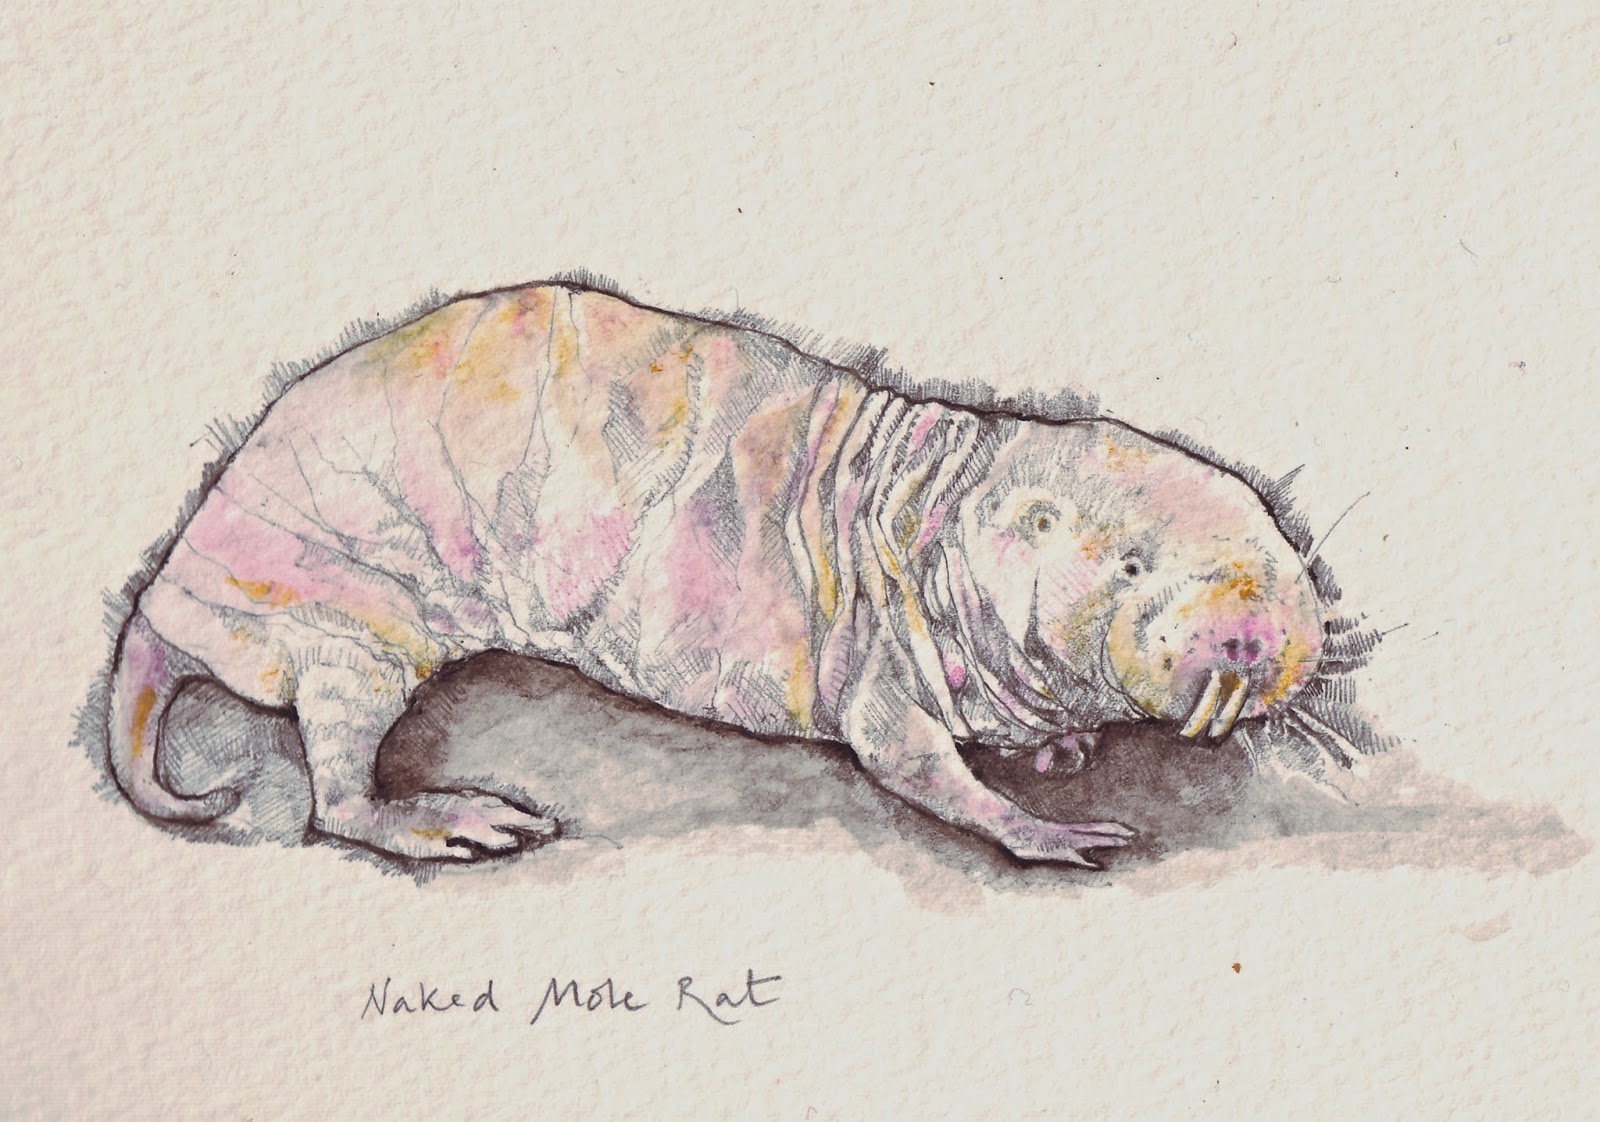 CURIOUS CREATURES 3 - The Naked Mole Rat — JUMP! MAG